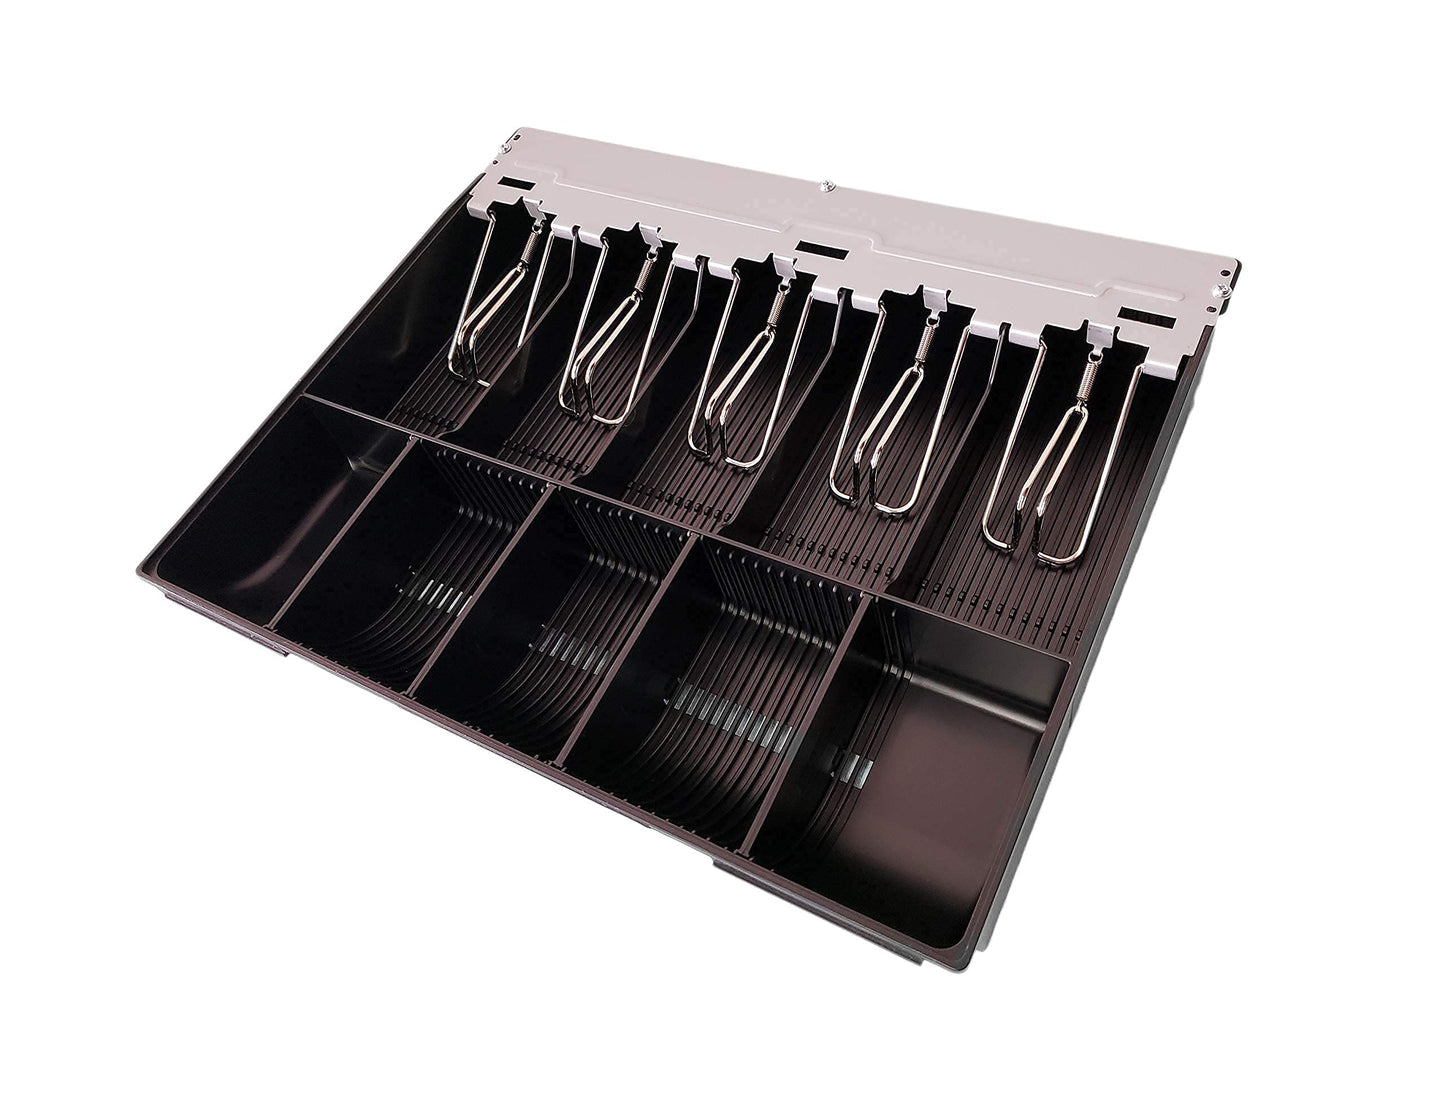 HK SYSTEMS SAM4S Cash Drawer Insert Money Tray Metal wire gripper 57, 5 Bills and 5 Coins, Compatible with Sam4s ER-5200, ER-5240, ER-5215, ER-900 Series, SPS-300 HK-7200 HK-7240 HK-7215 Series